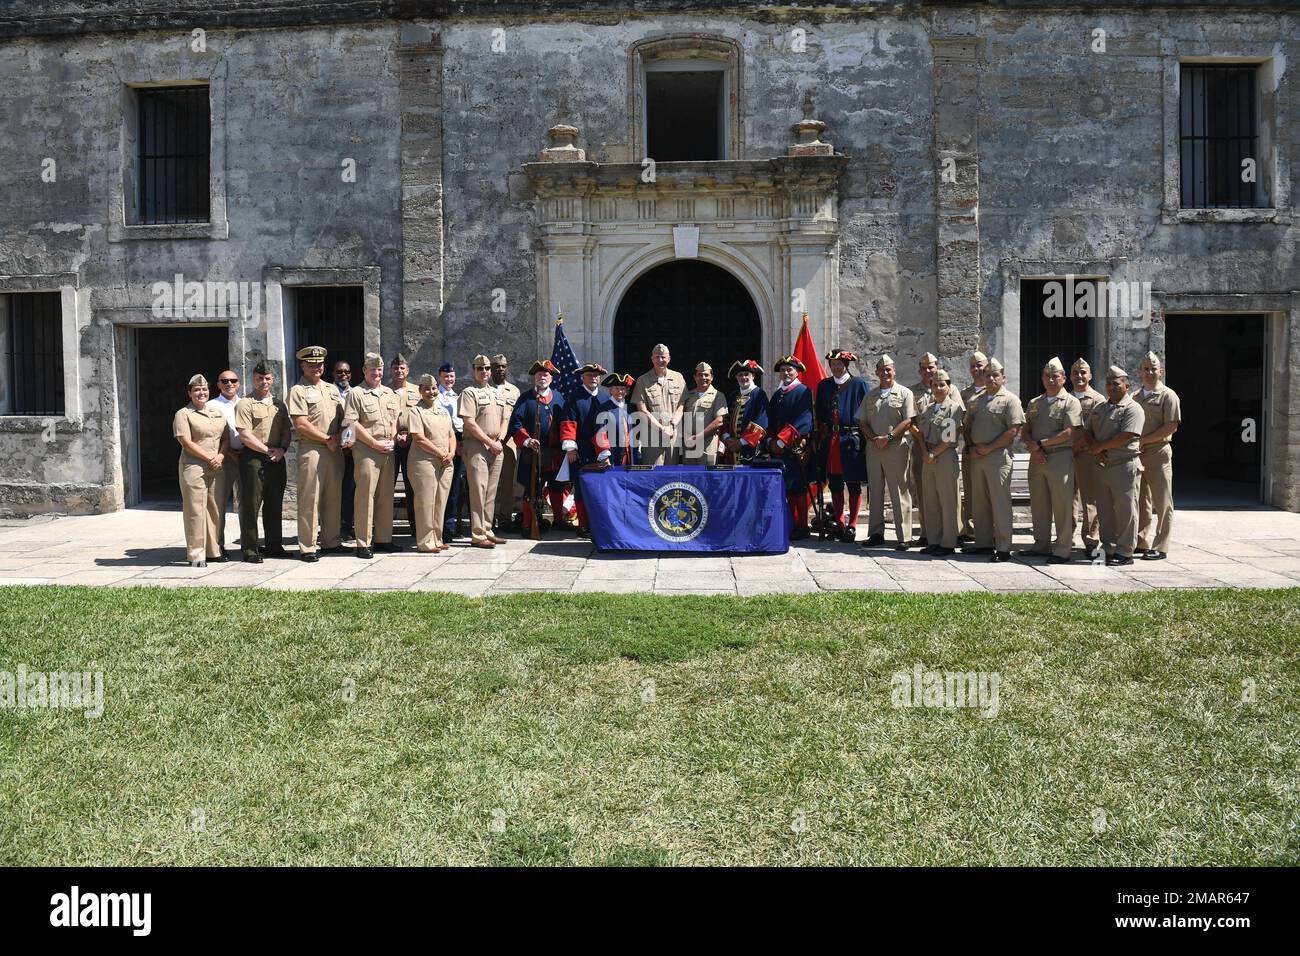 220603-N-DB801-0229  ST. AUGUSTINE, Fla. - (June 3, 2022) – U.S. Navy personnel pose for a group photo alongside sailors from the Peruvian navy, U.S. Coast Guard, U.S. Marine Corps, actors from the 18th century Spanish colonial era, and other distinguished guests at the Castillo de San Marcos National Monument during the closing ceremony of the 28th annual Maritime Staff Talks (MST), June 3, 2022. MSTs support the U.S. maritime strategy by building and strengthening working relationships with U.S. and partner nations. Stock Photo